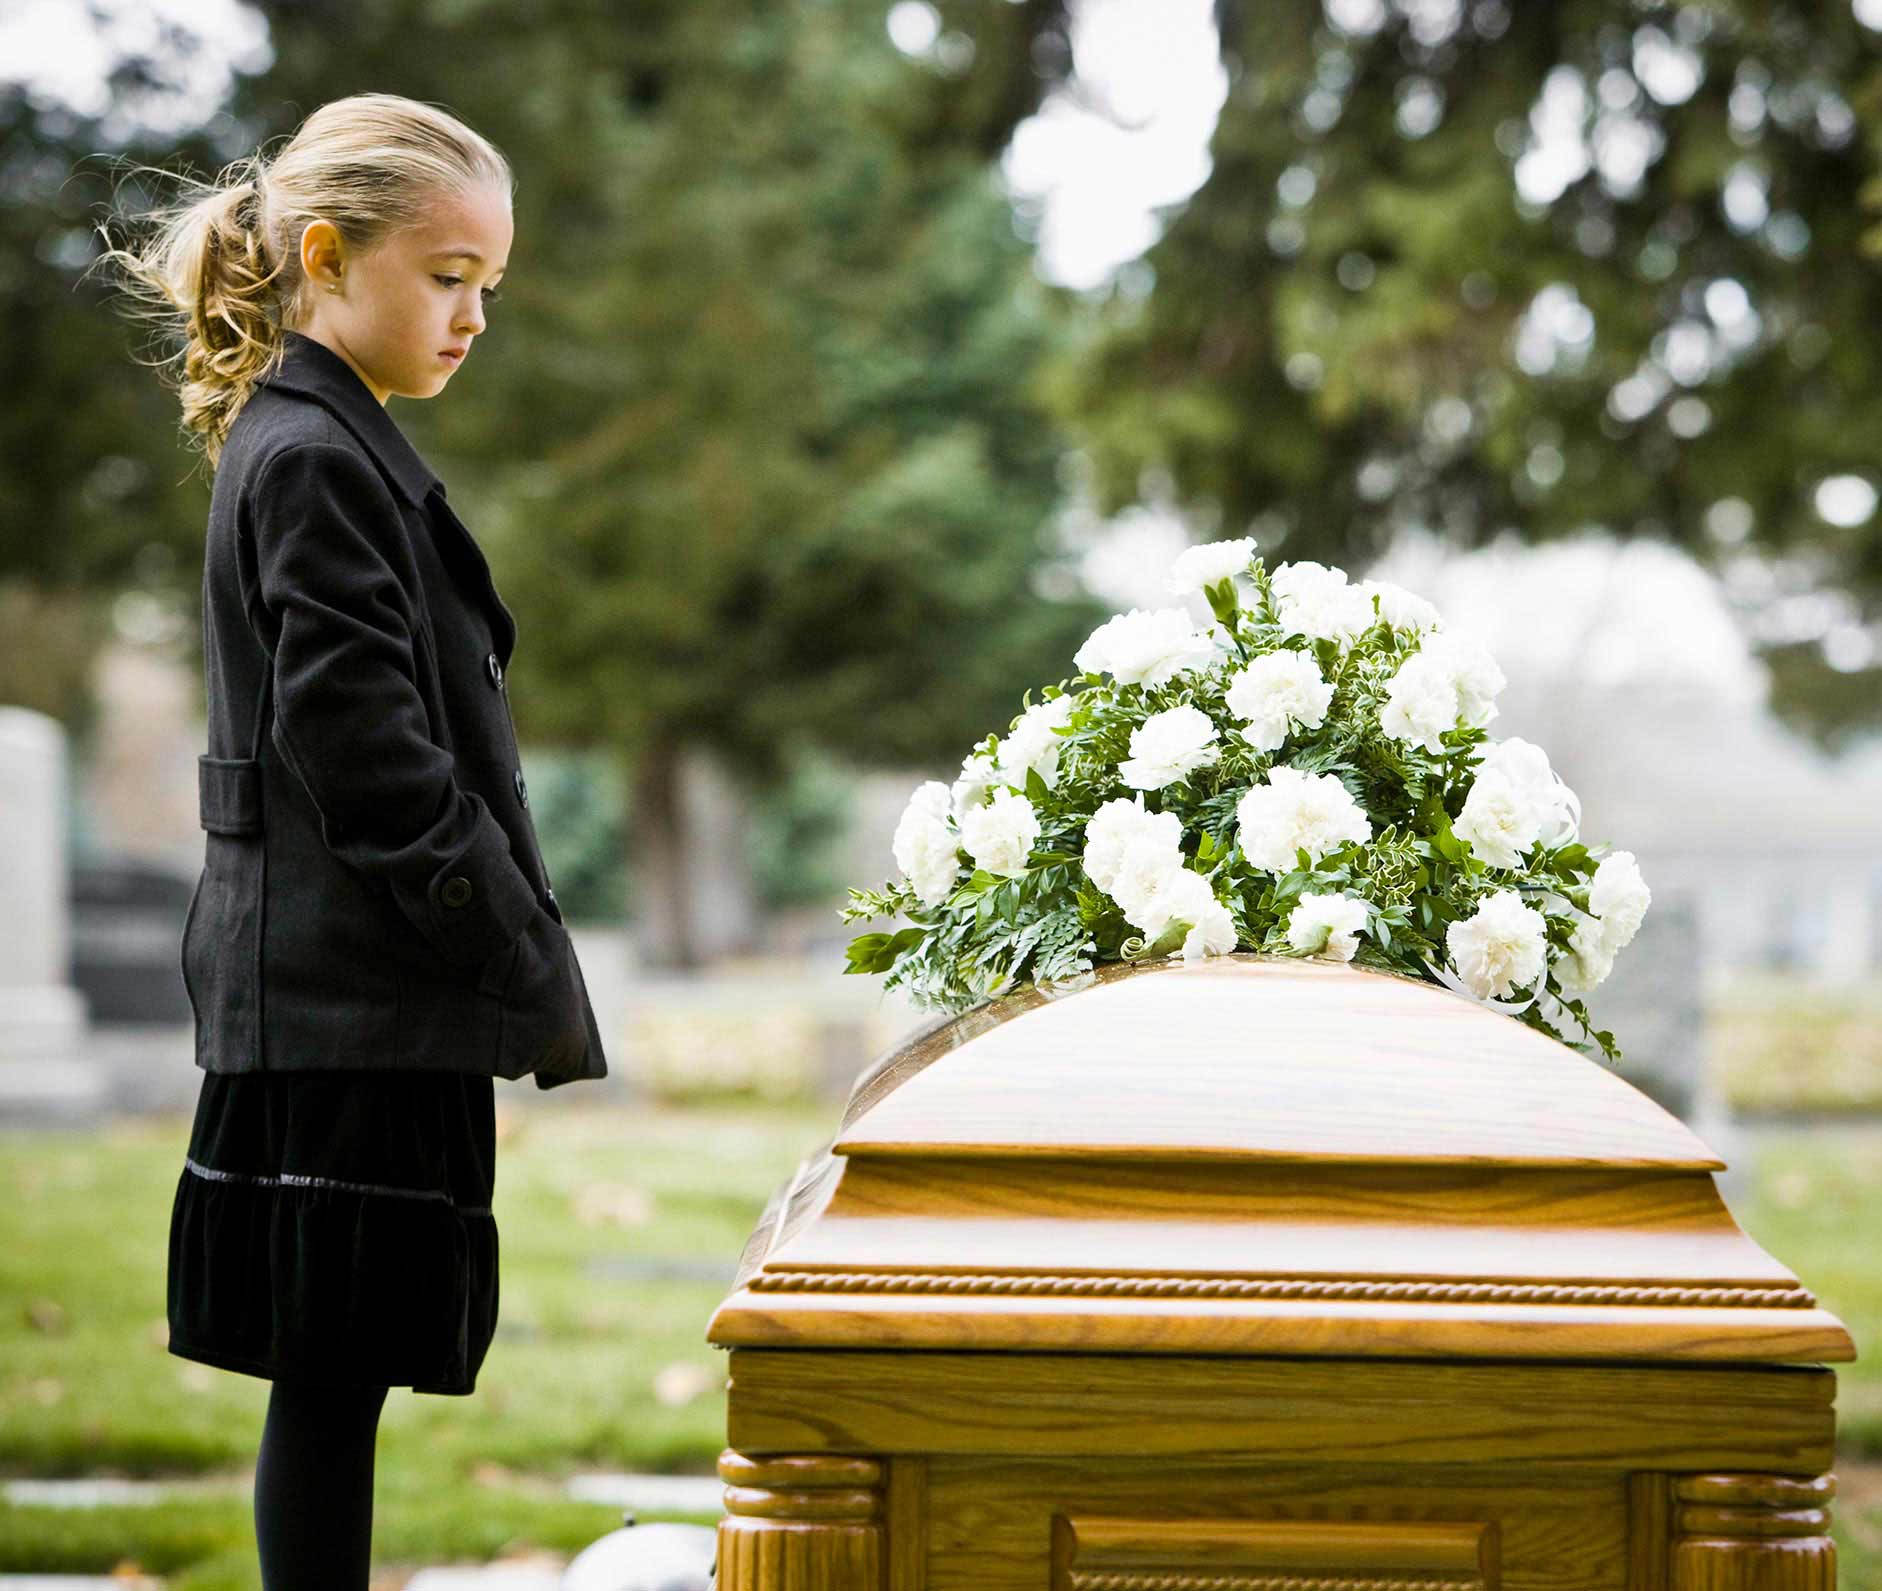 a girl in need of a wrongful death attorney in Roseville, CA